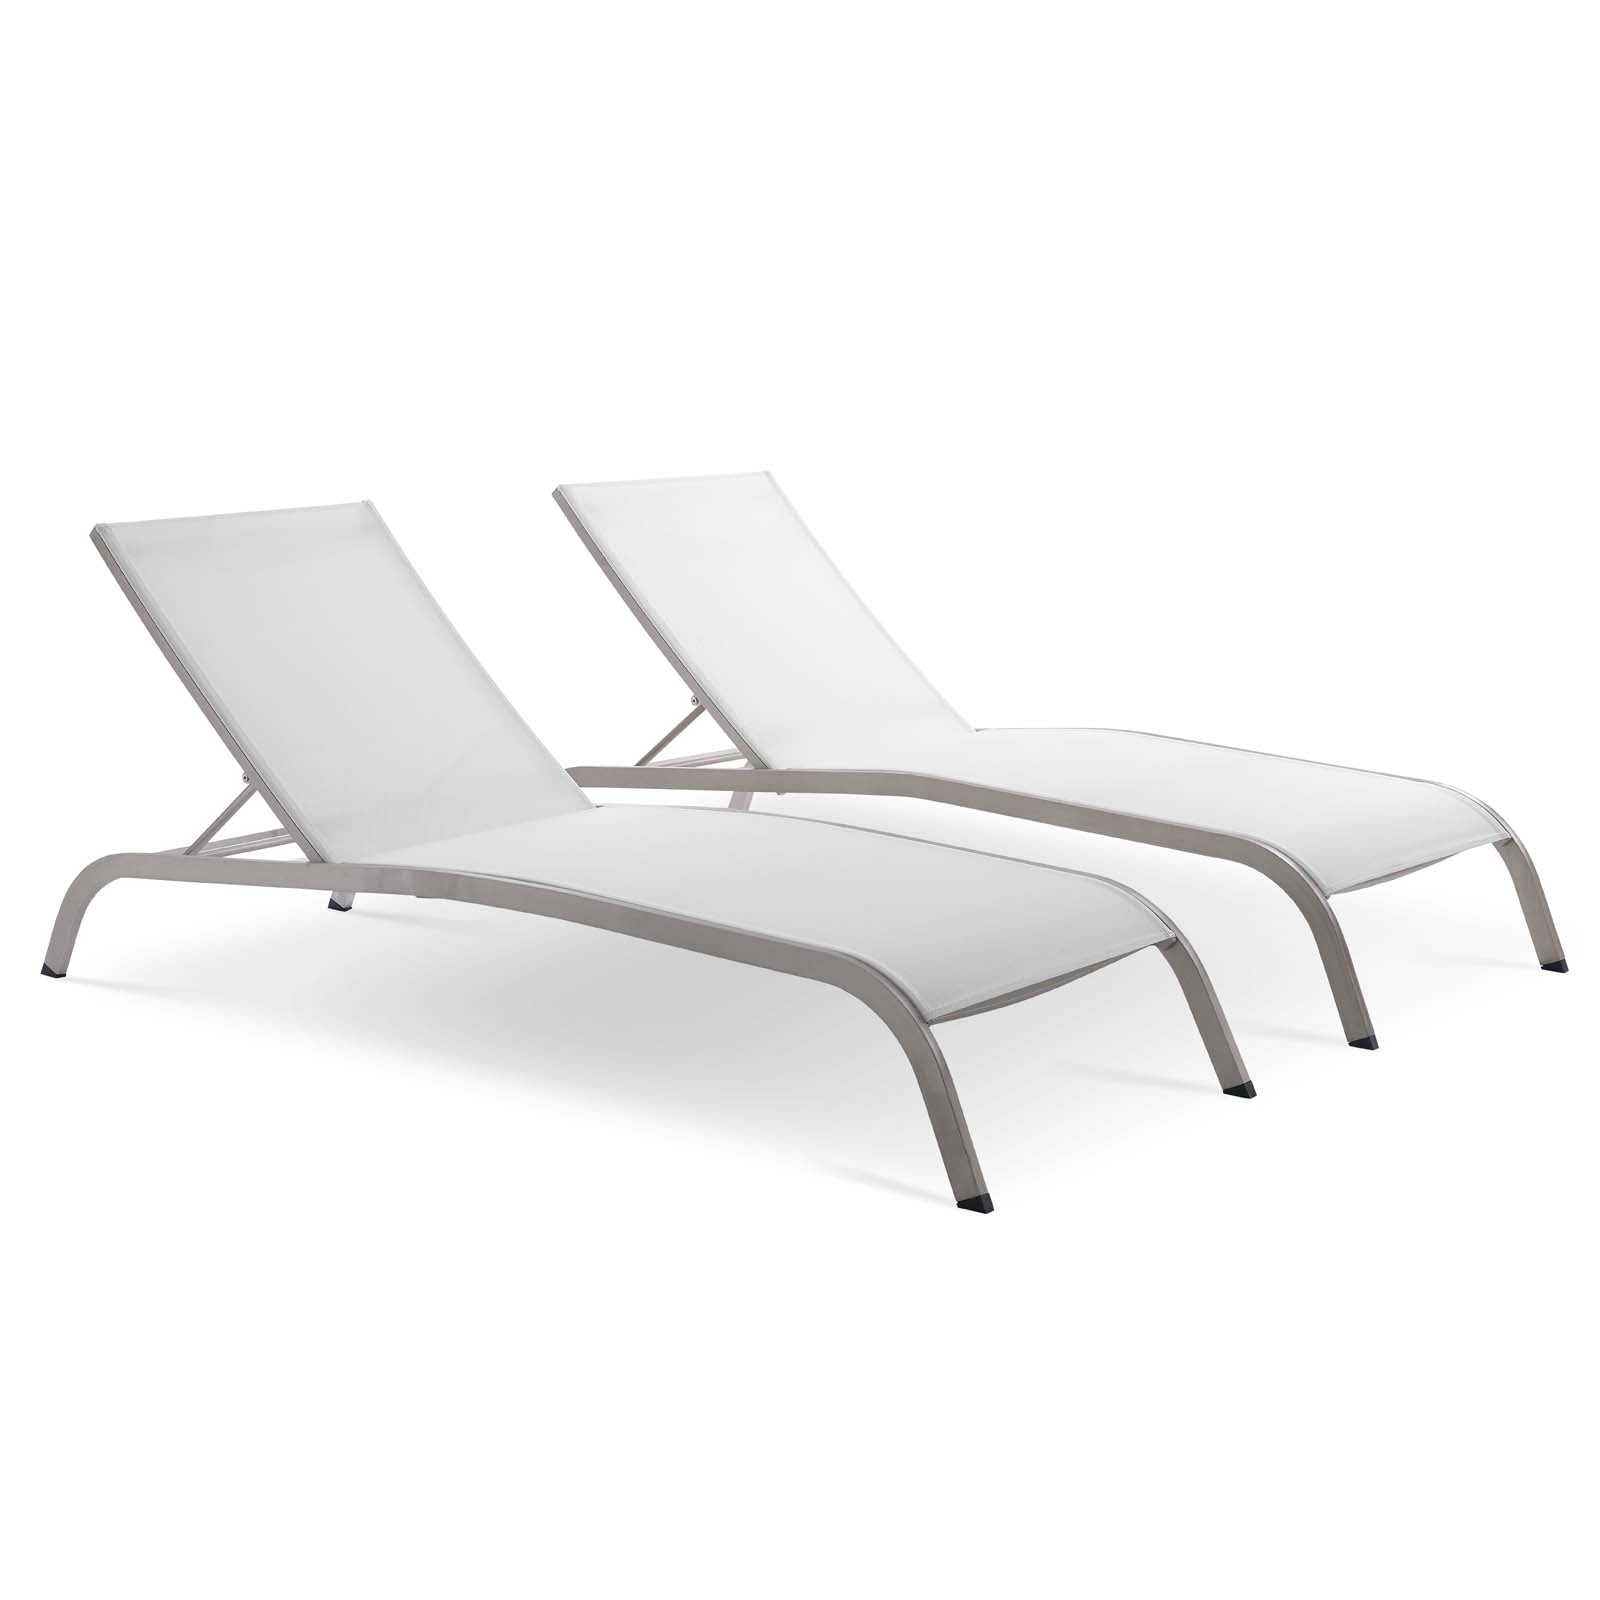 Savannah Outdoor Patio Mesh Chaise Lounge Set of 2-Outdoor Set-Modway-Wall2Wall Furnishings